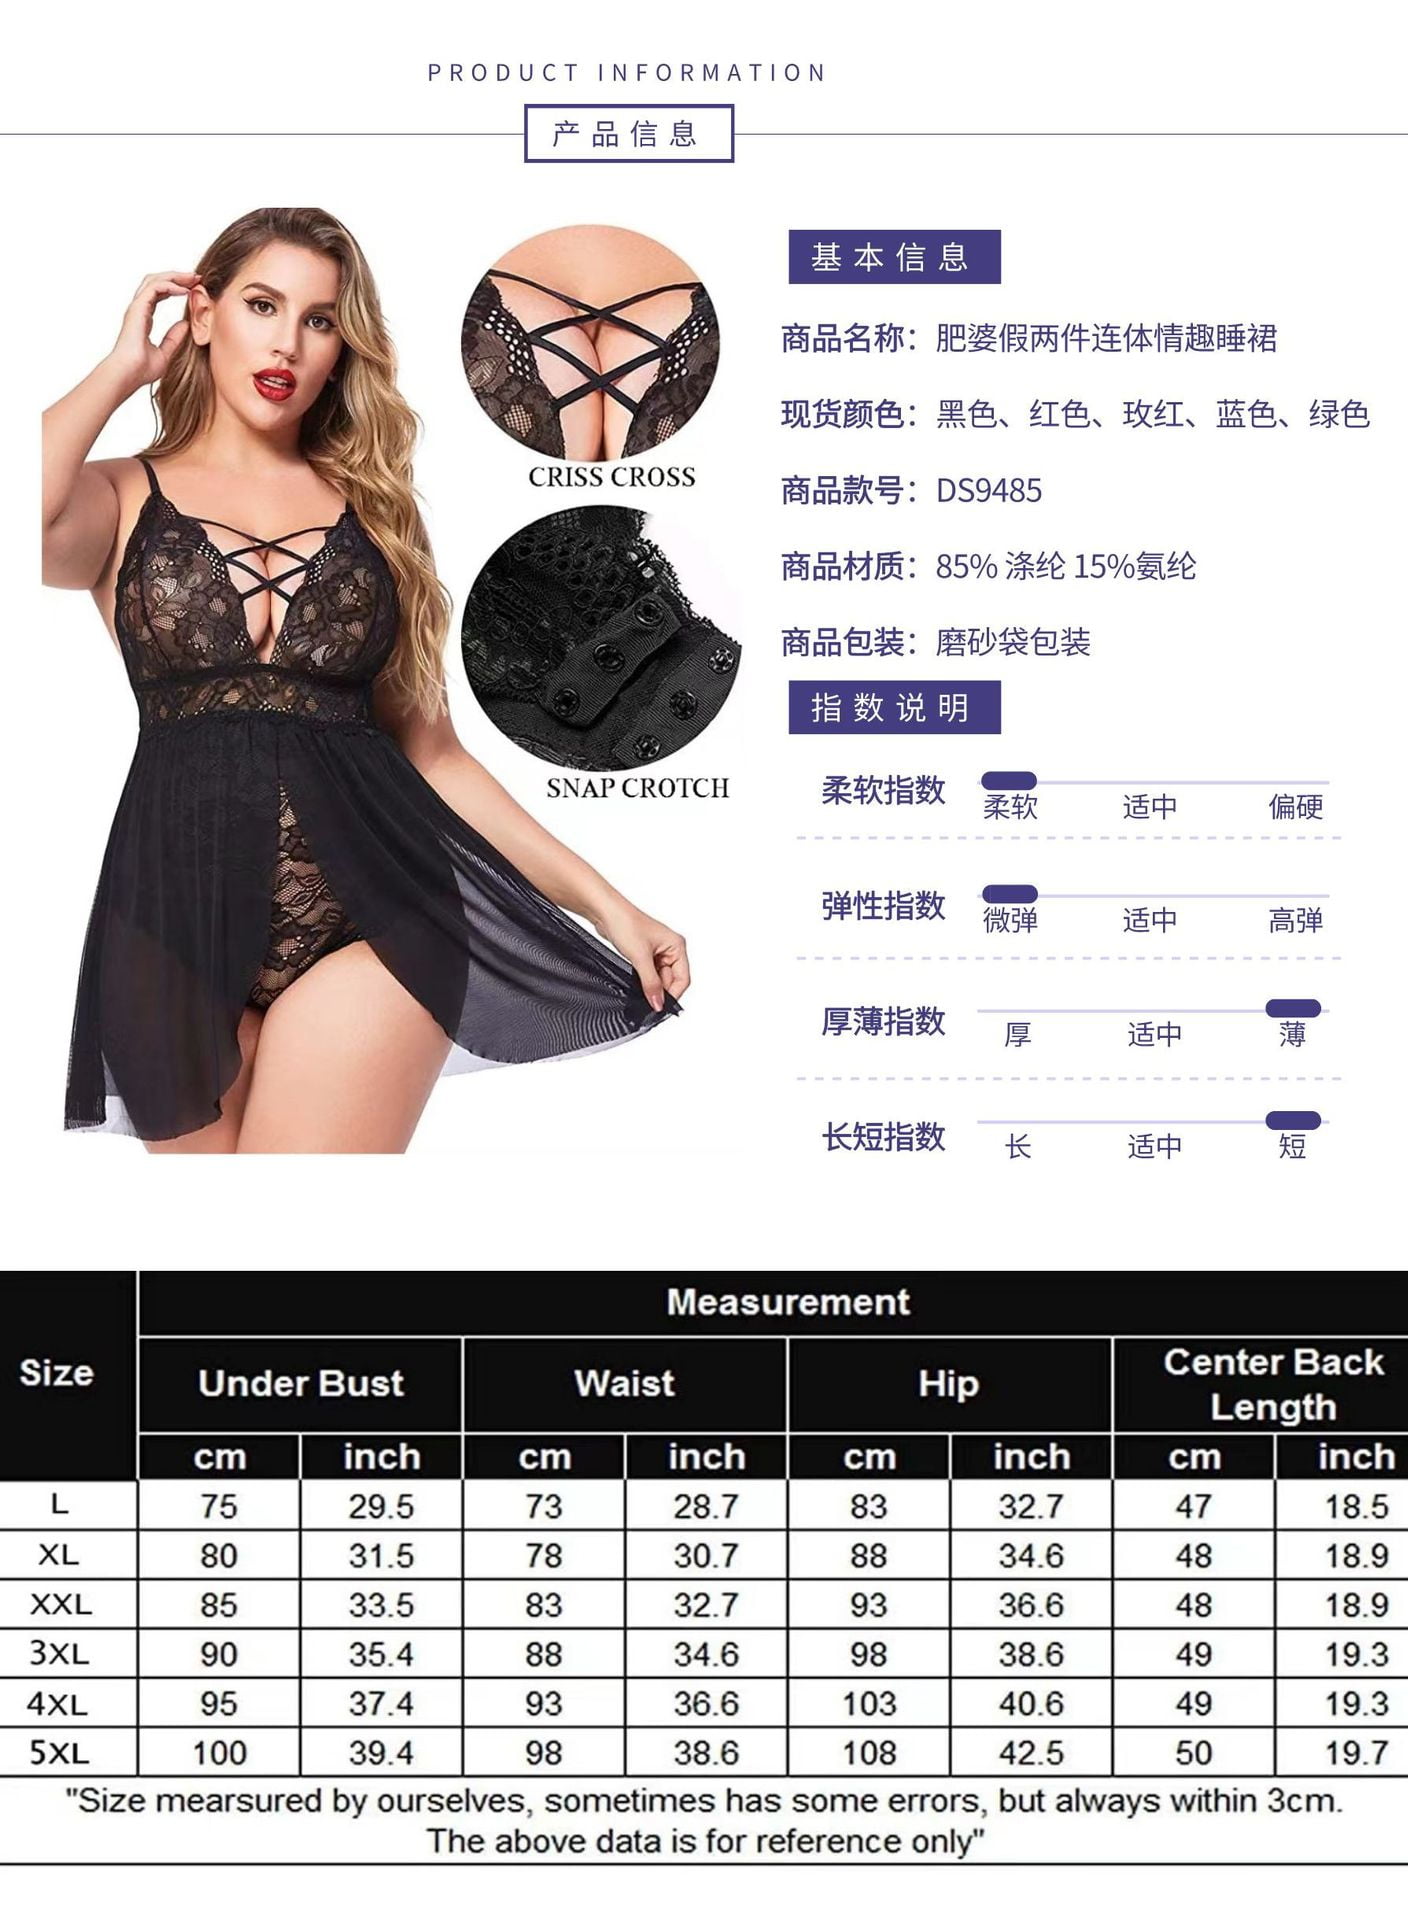 Sexy Lingerie For Women,V Neck Nightwear Satin Sleepwear Lace Chemise Mini Teddy WomenS Lingerie Sleep and Lounge Sex Nightgown for Women,Sex Gift For Husband photo pic